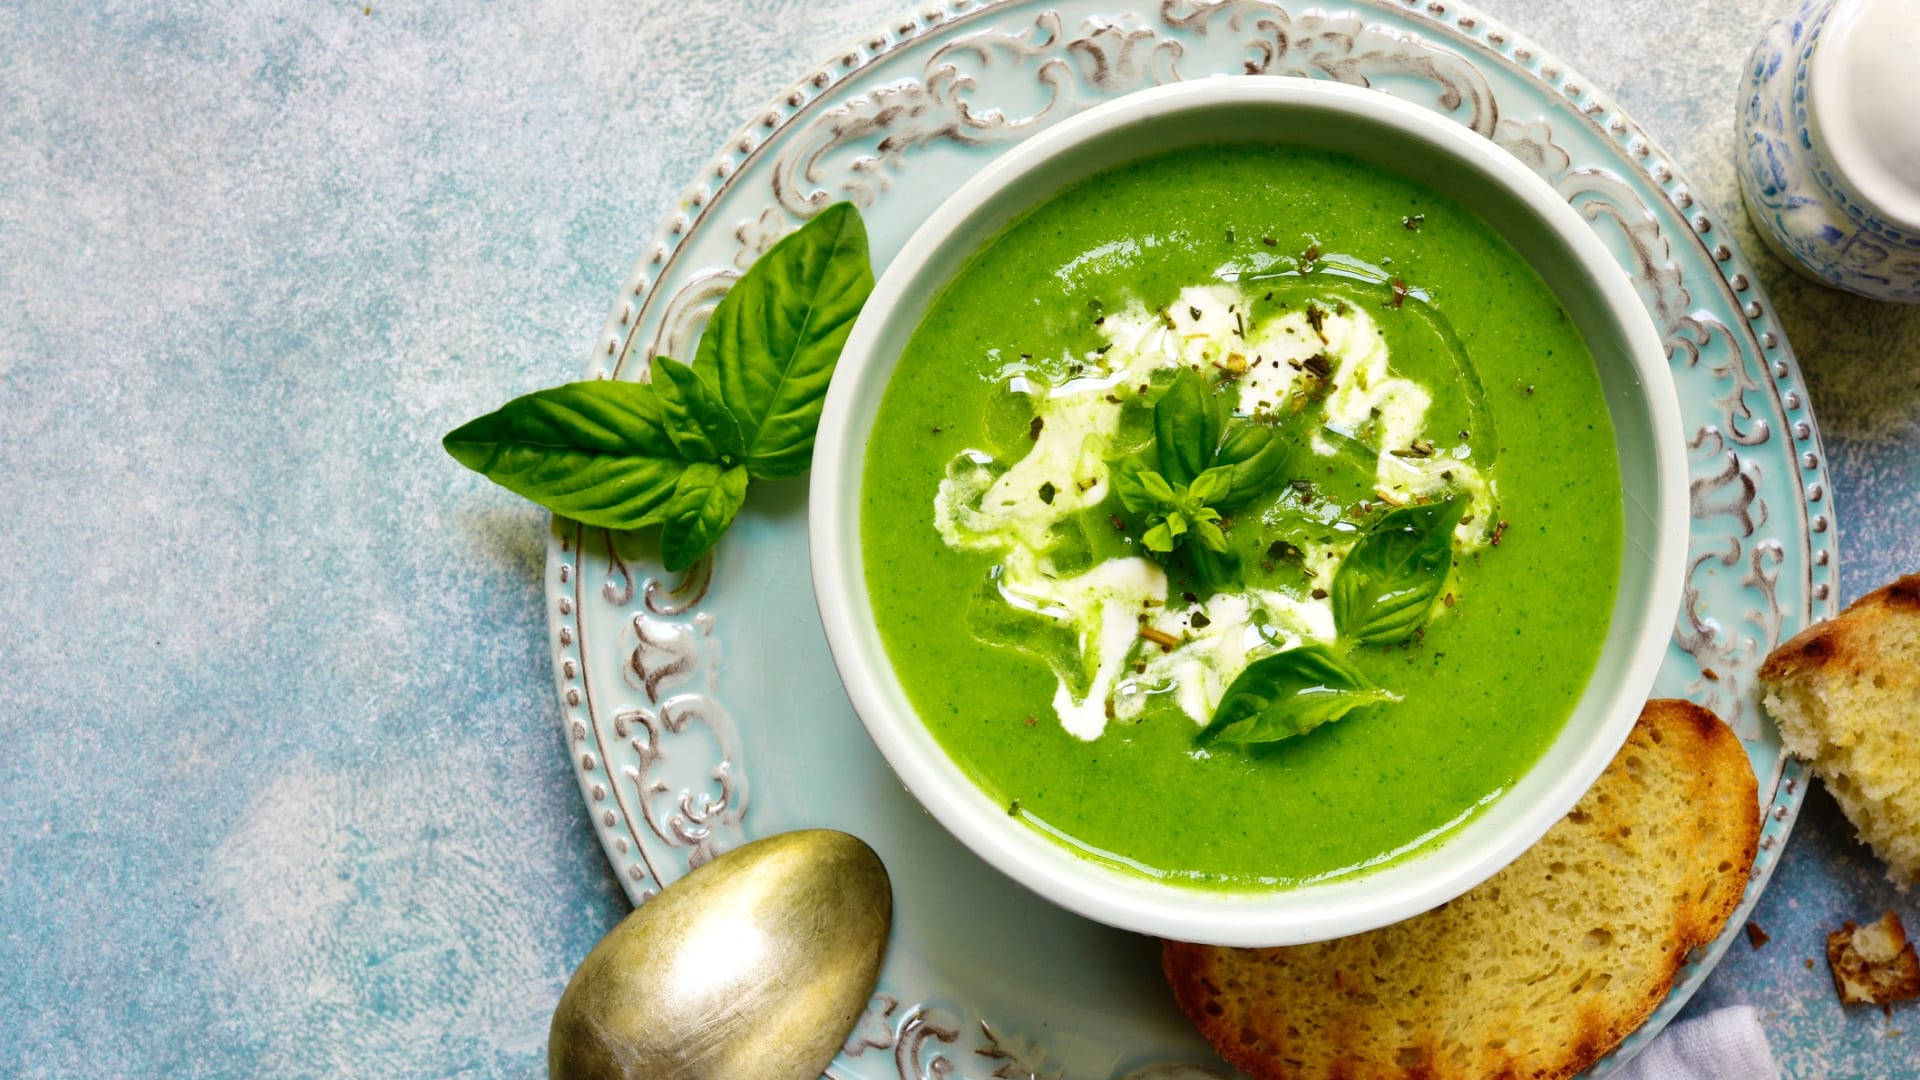 Get ready for spring with green soup.  Does spinach win, or rather asparagus?